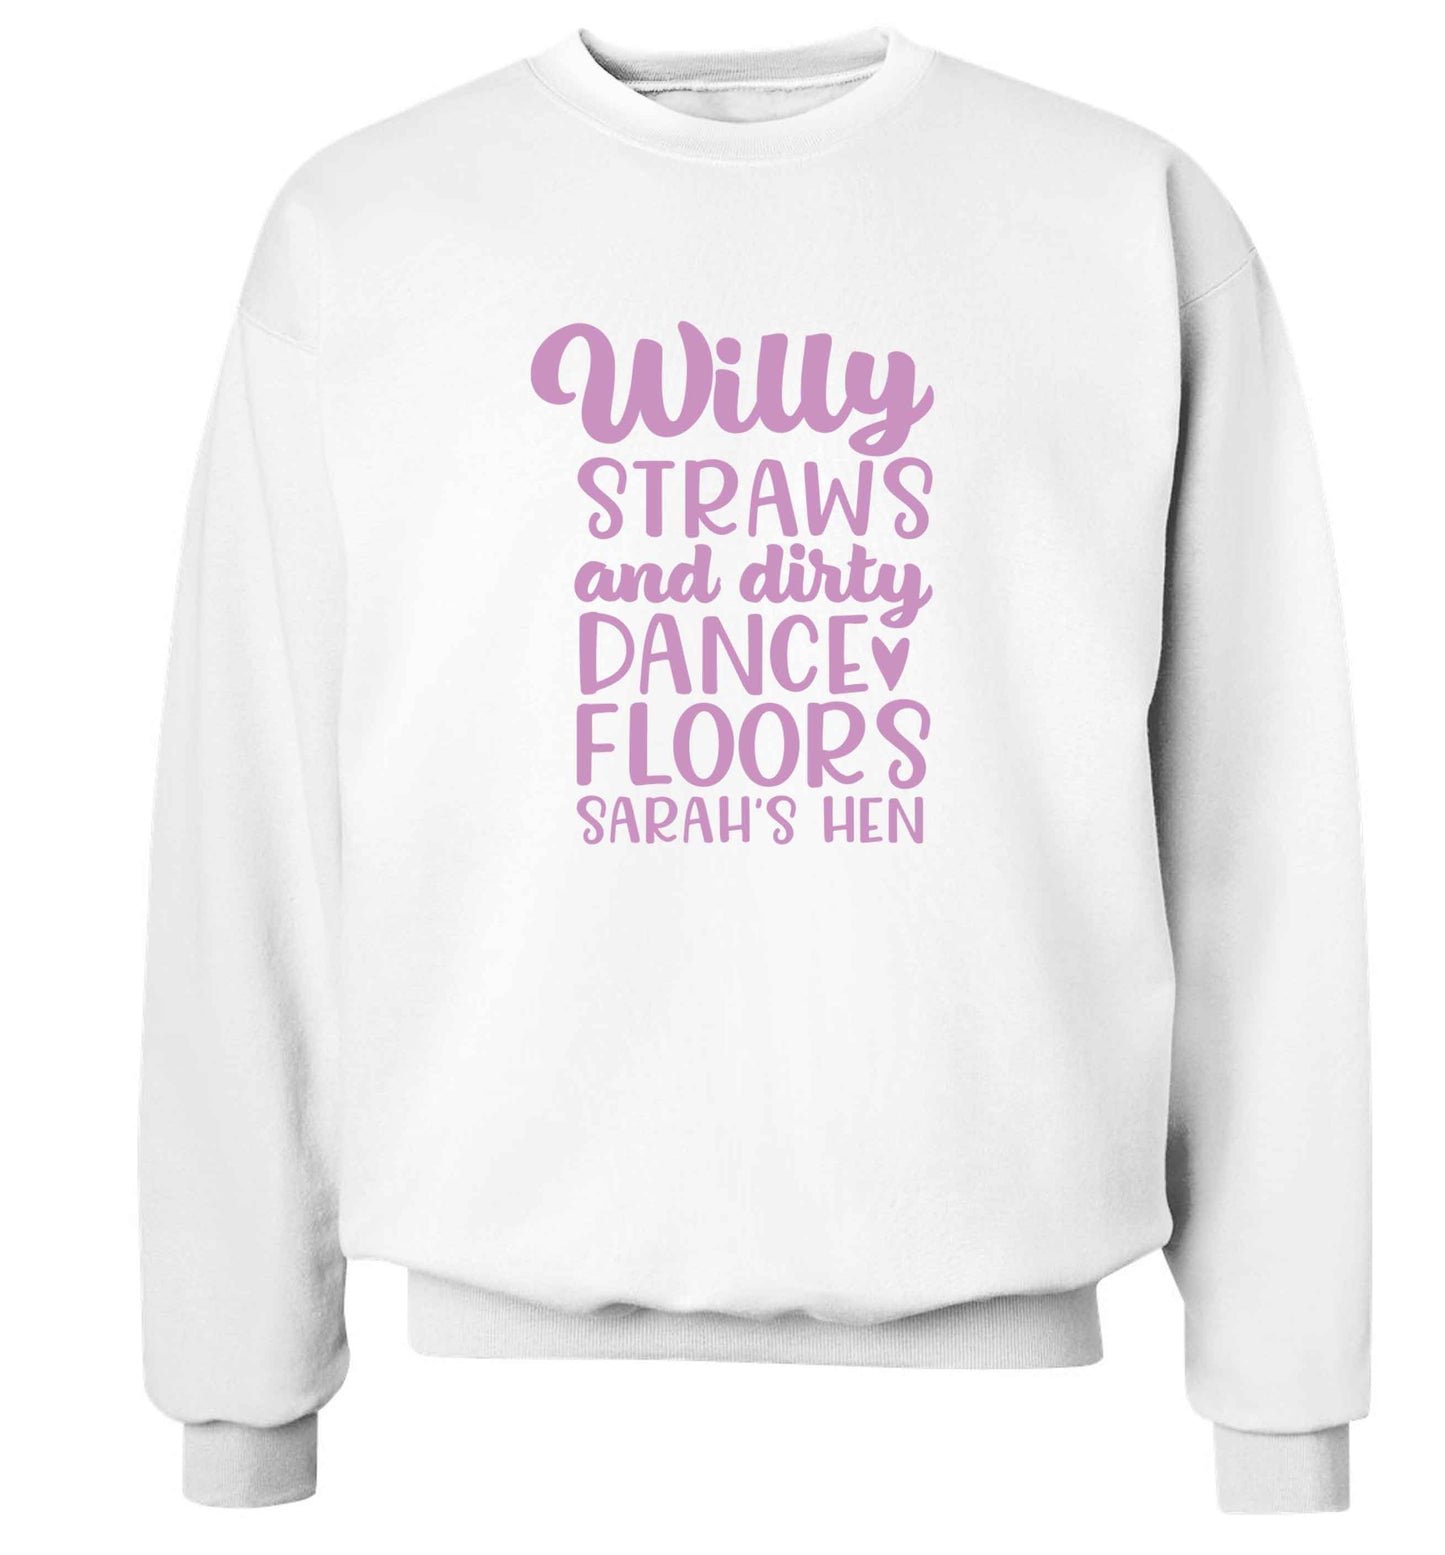 Willy straws and dirty dance floors adult's unisex white sweater 2XL